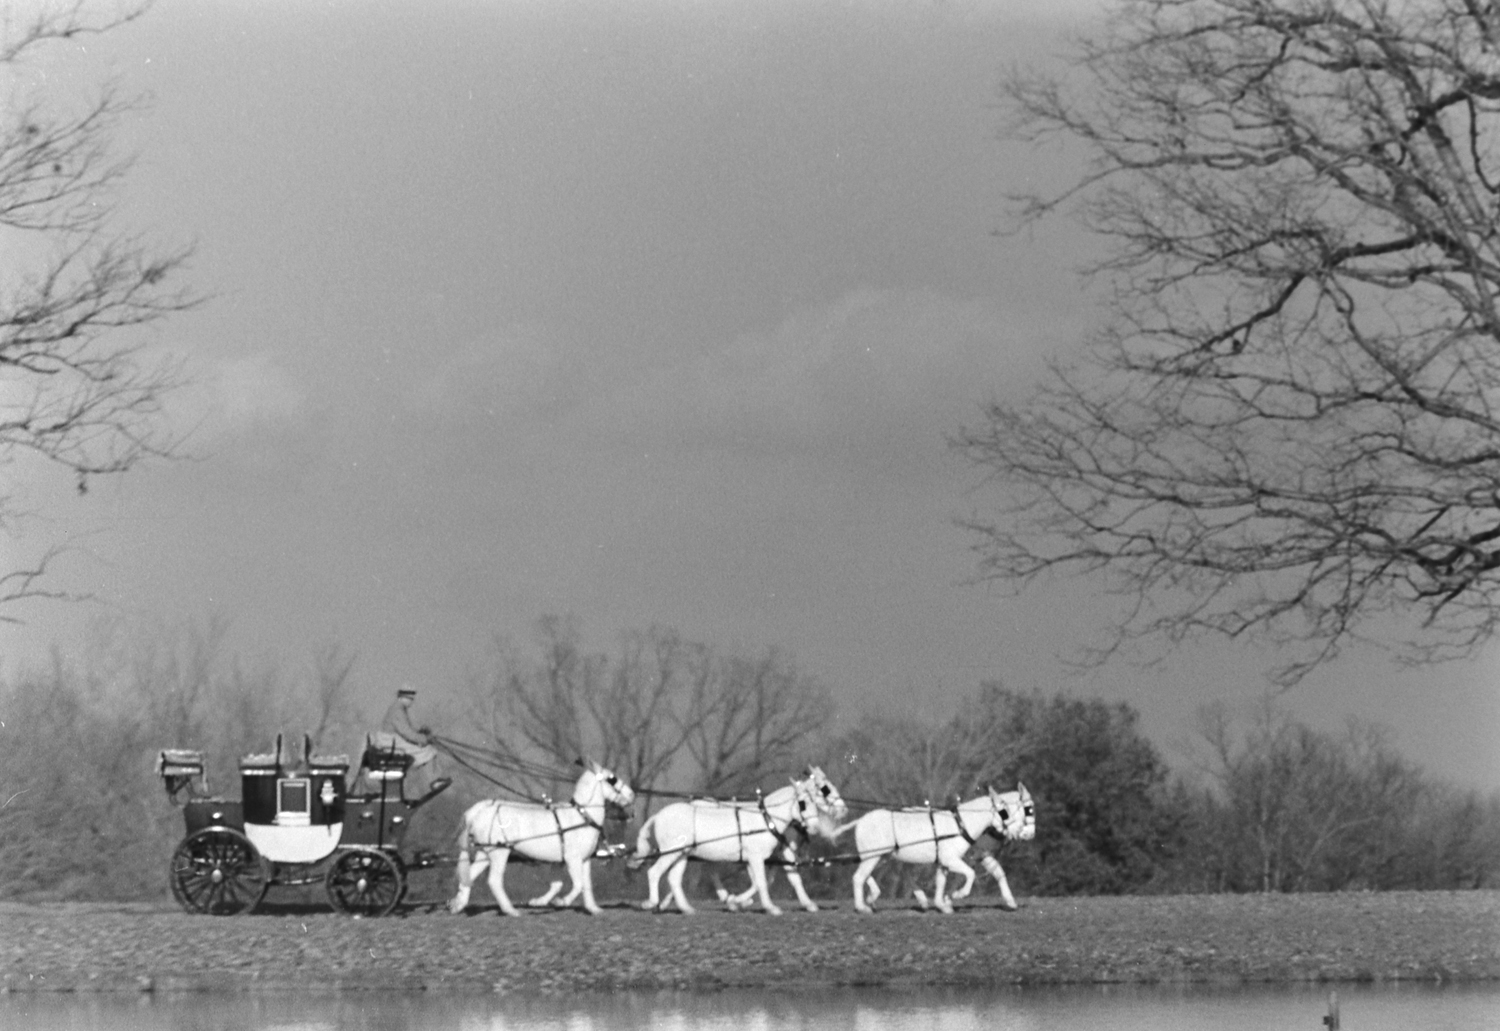 Expertly manipulating a team of six matched white mules, Gussie Busch rolls through the Deer Park at Grant's Farm atop a pony coach.